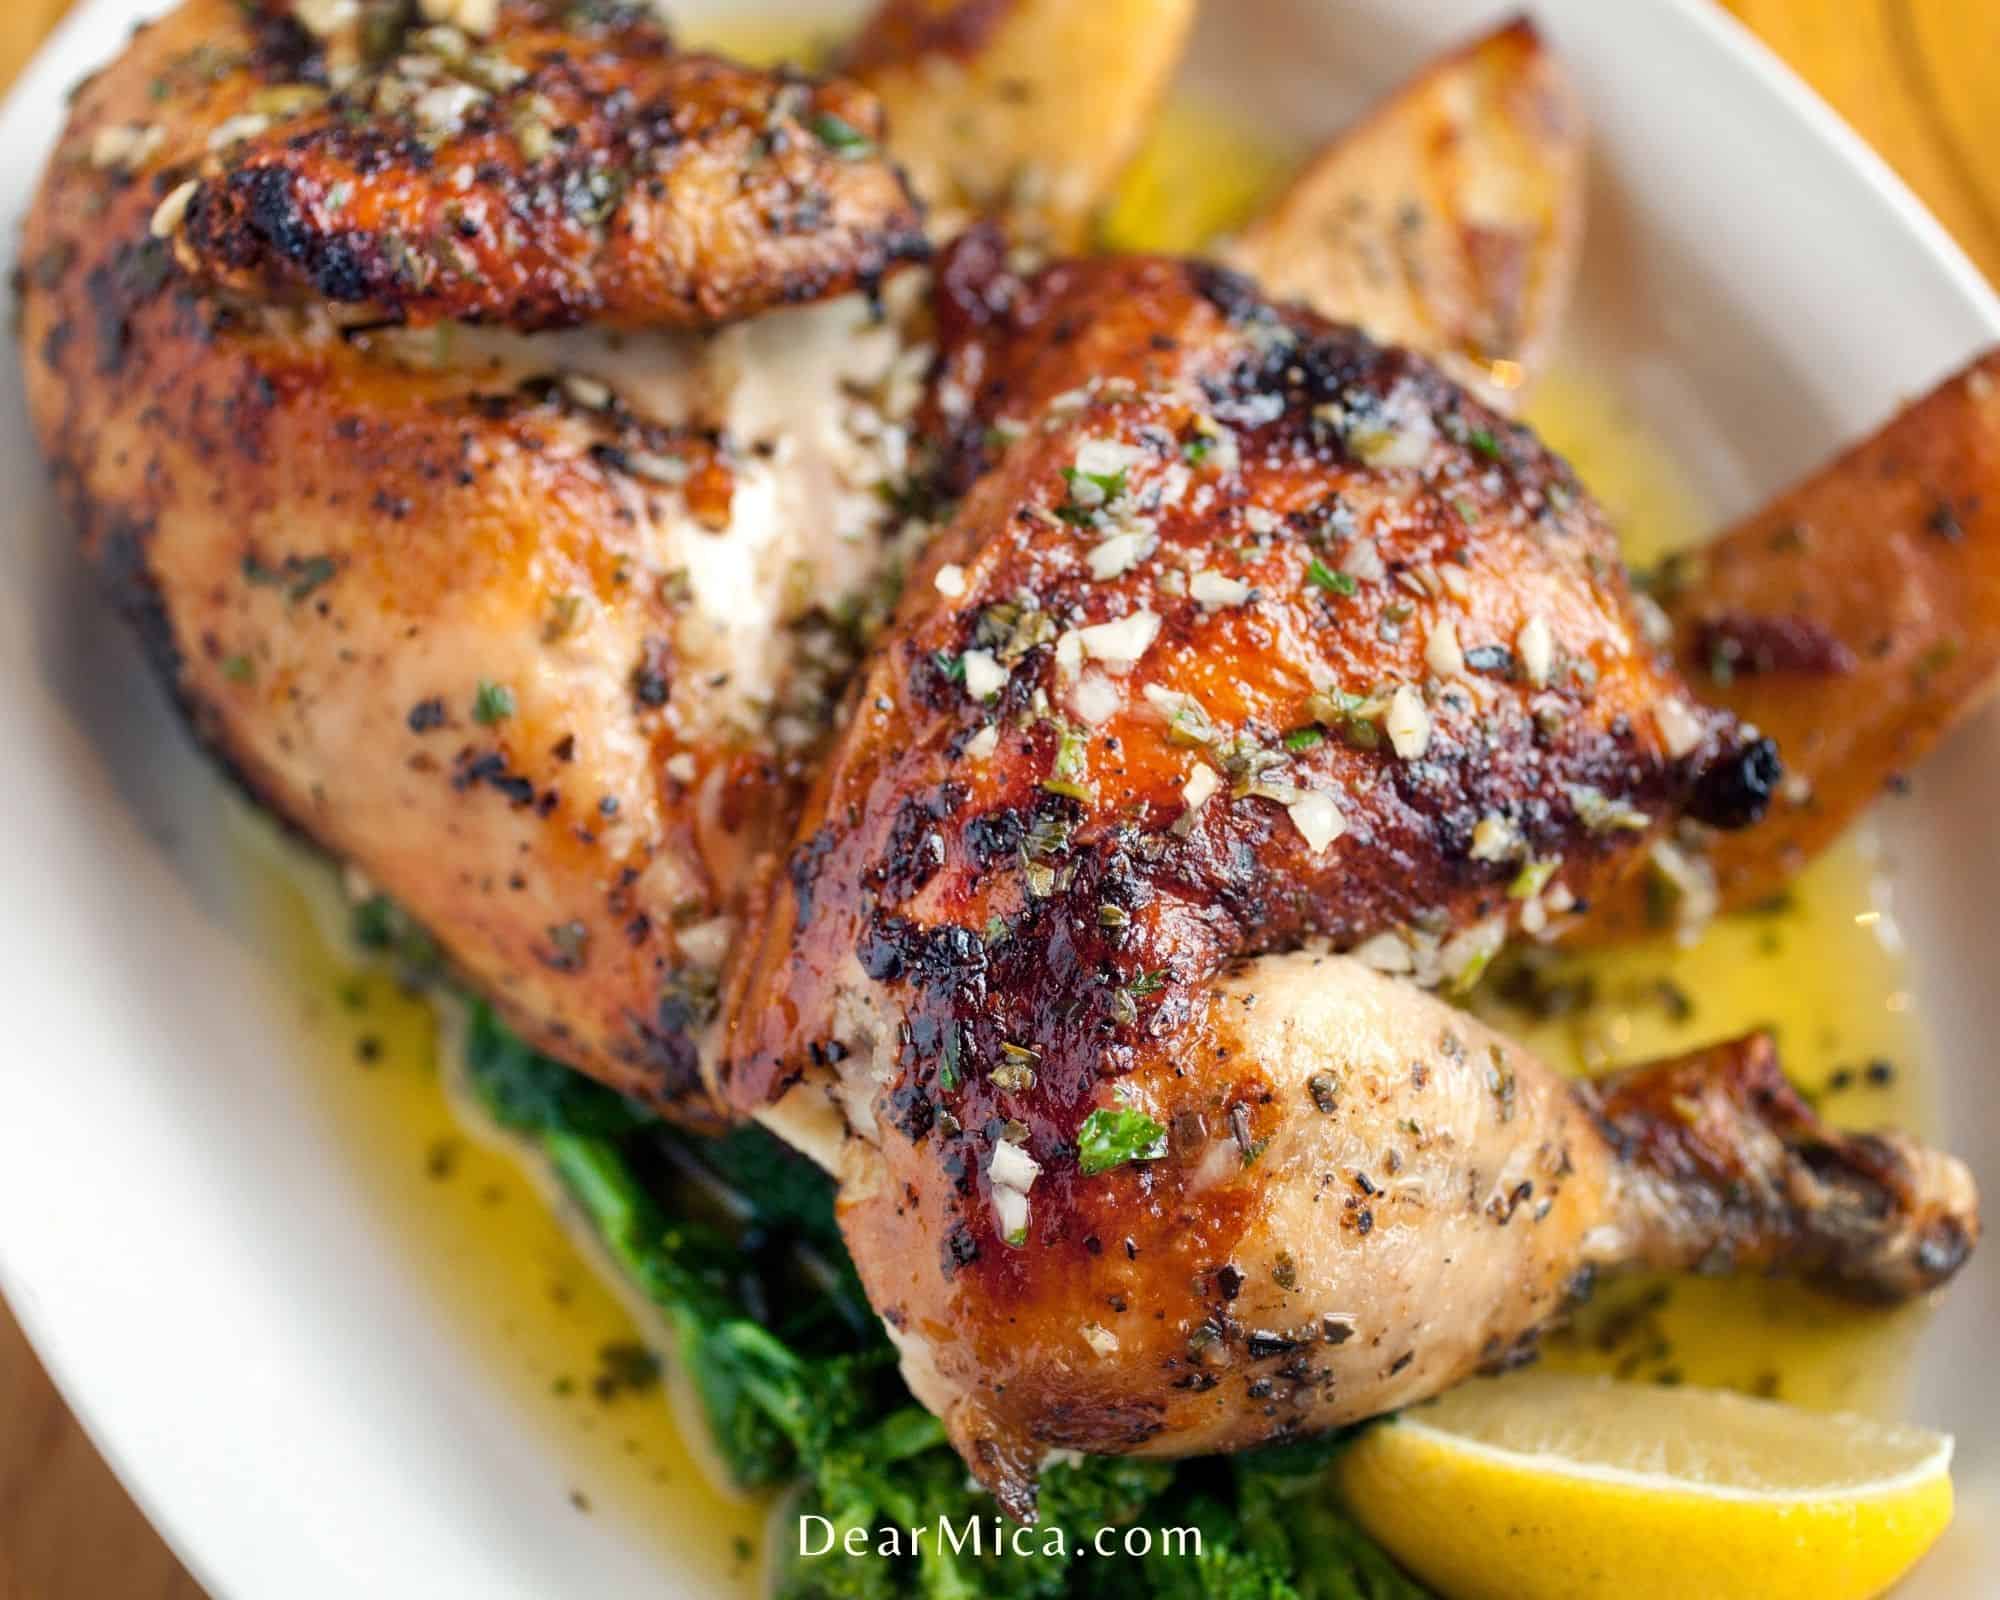 Side view of Half roasted chicken served on a white oval plate garnished with lemon wedges.